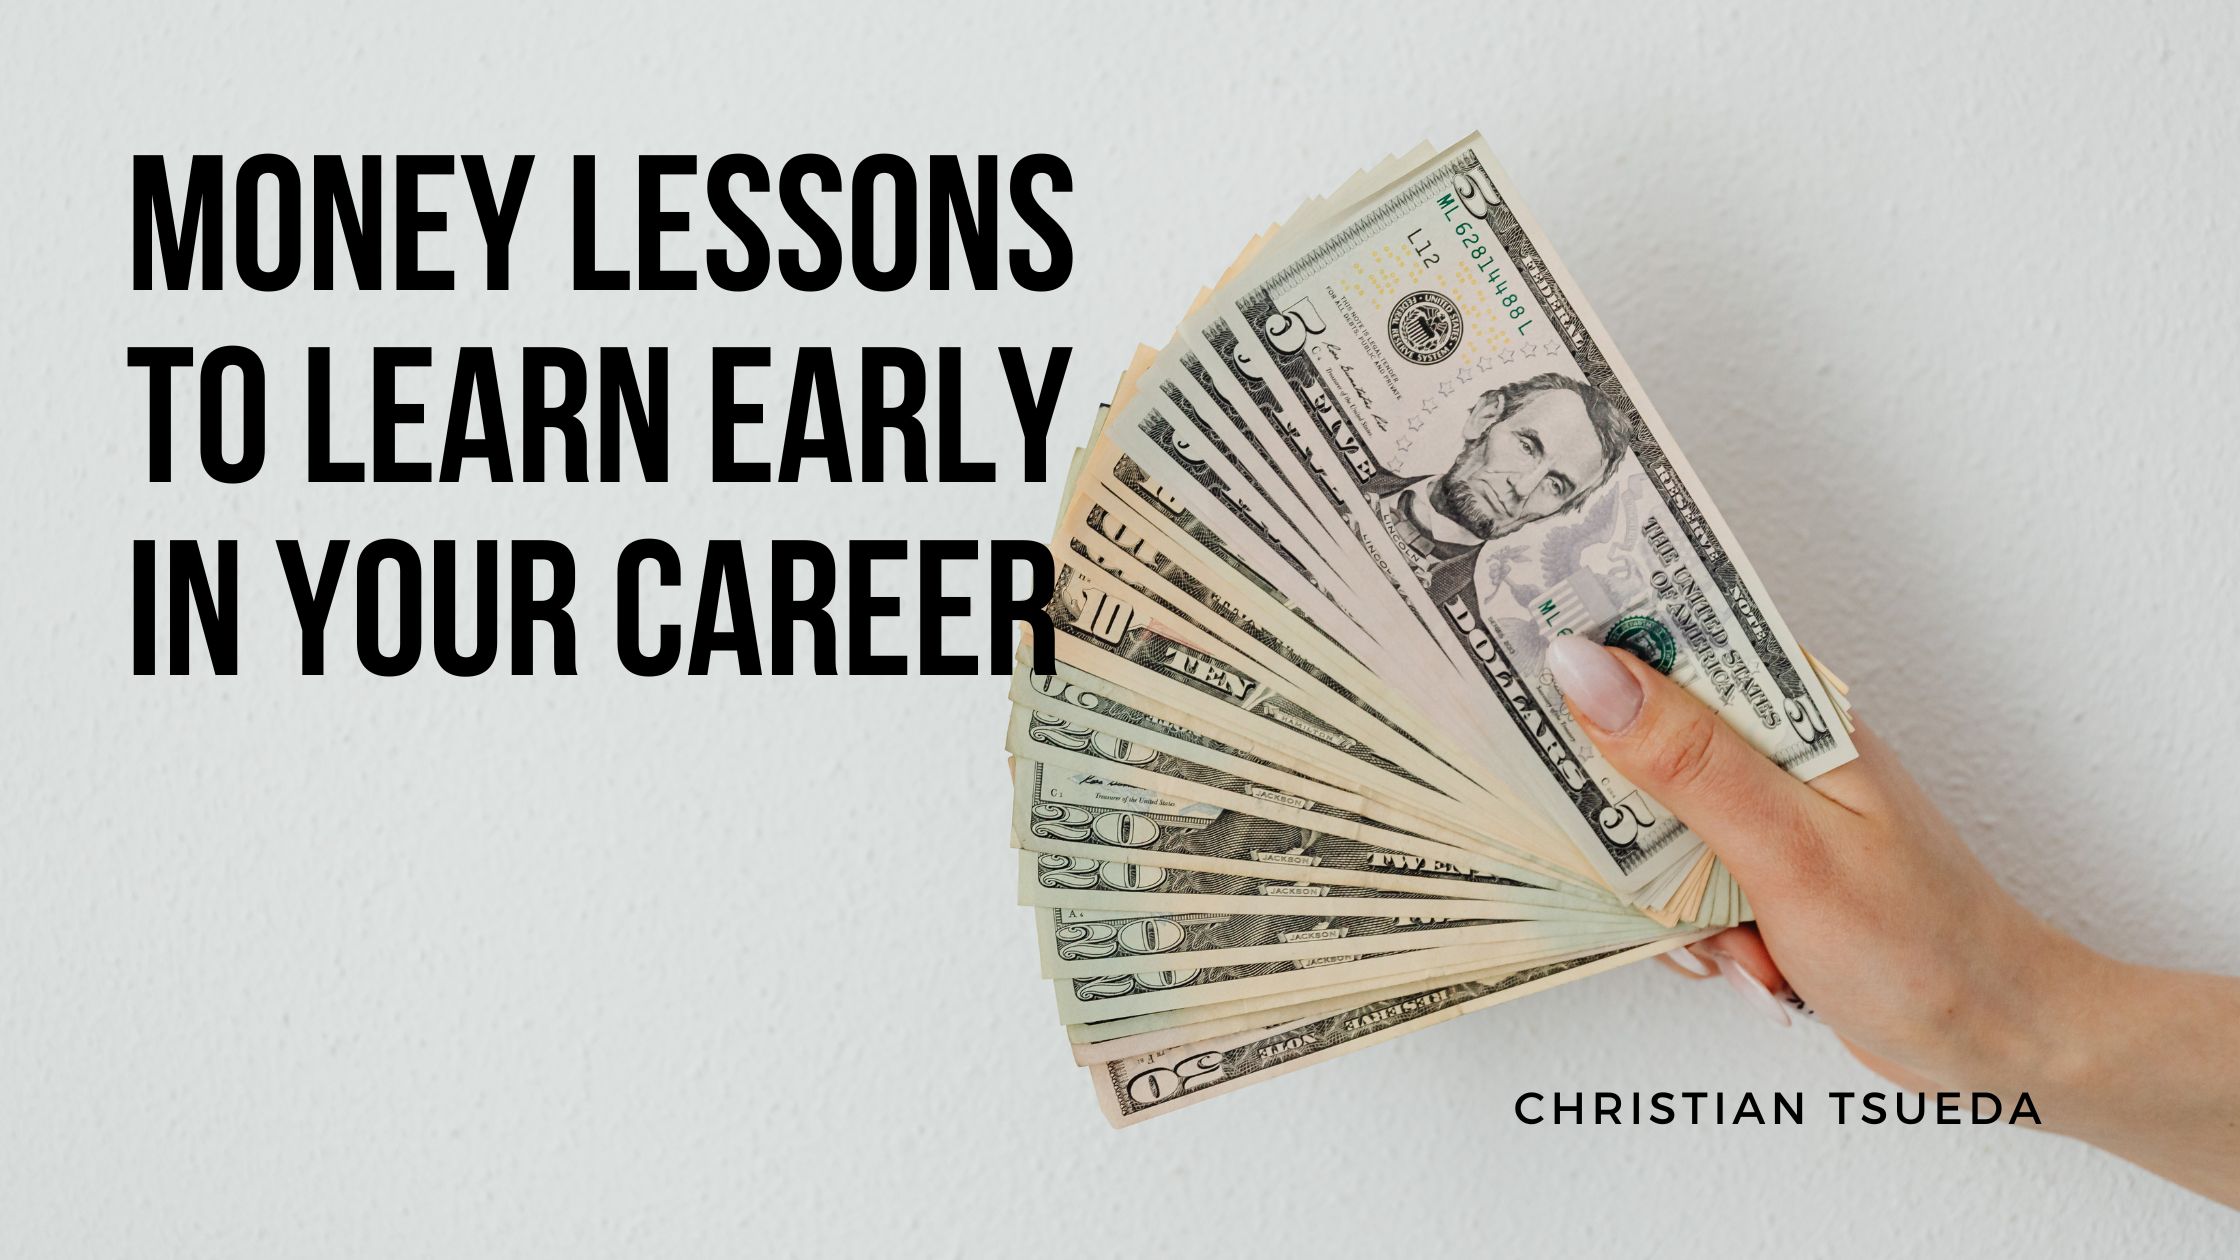 Money Lessons to Learn Early in Your Career